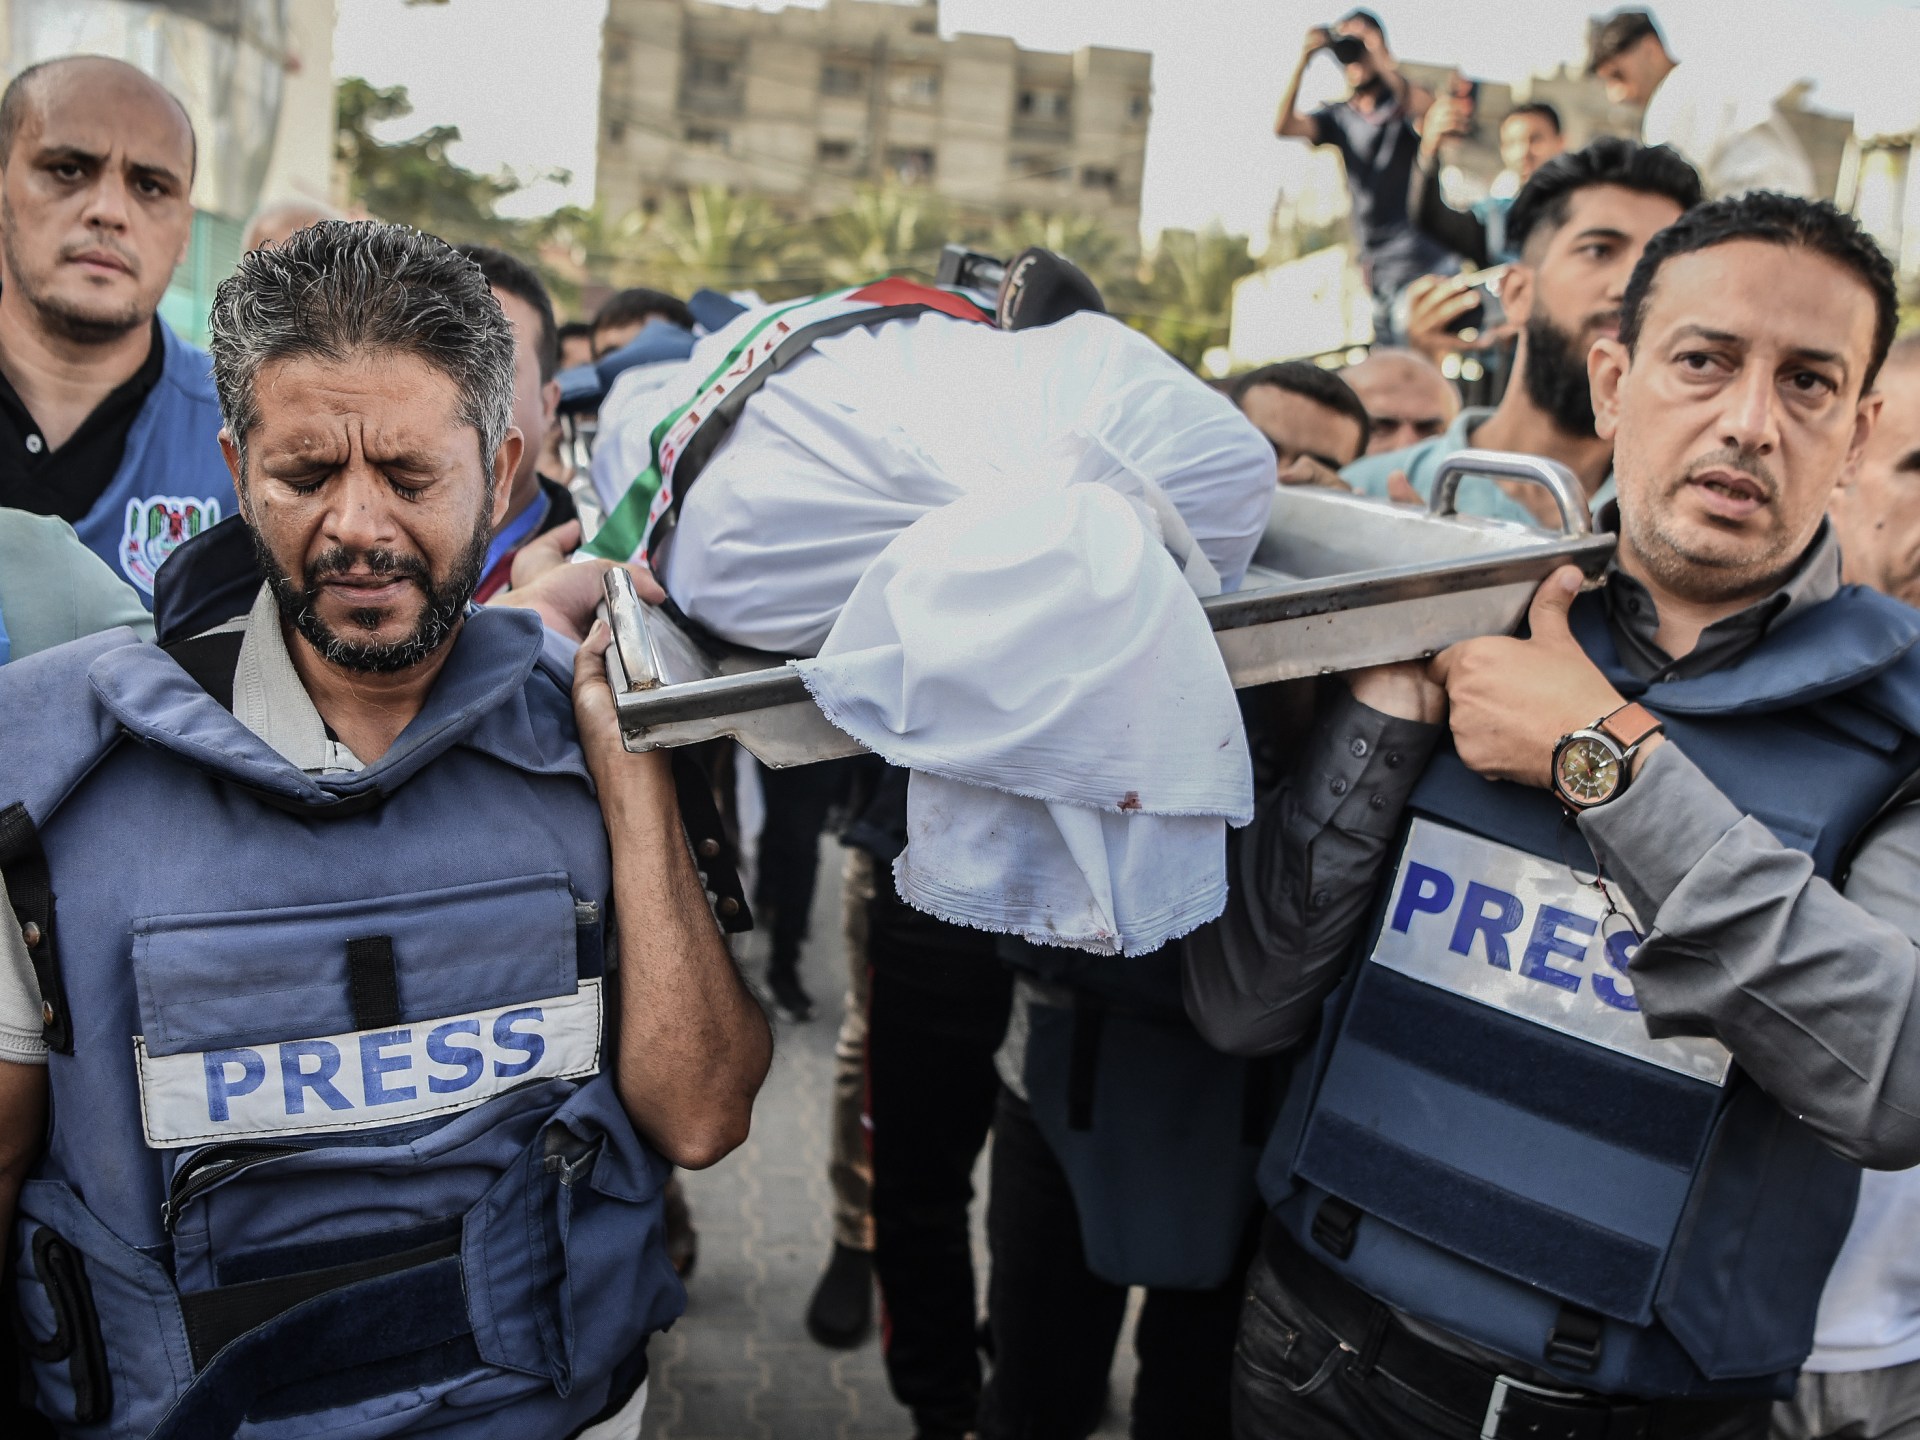 The newsroom has become a battleground in Israel’s war on Gaza | Israel-Palestine conflict #newsroom #battleground #Israels #war #Gaza #IsraelPalestine #conflict